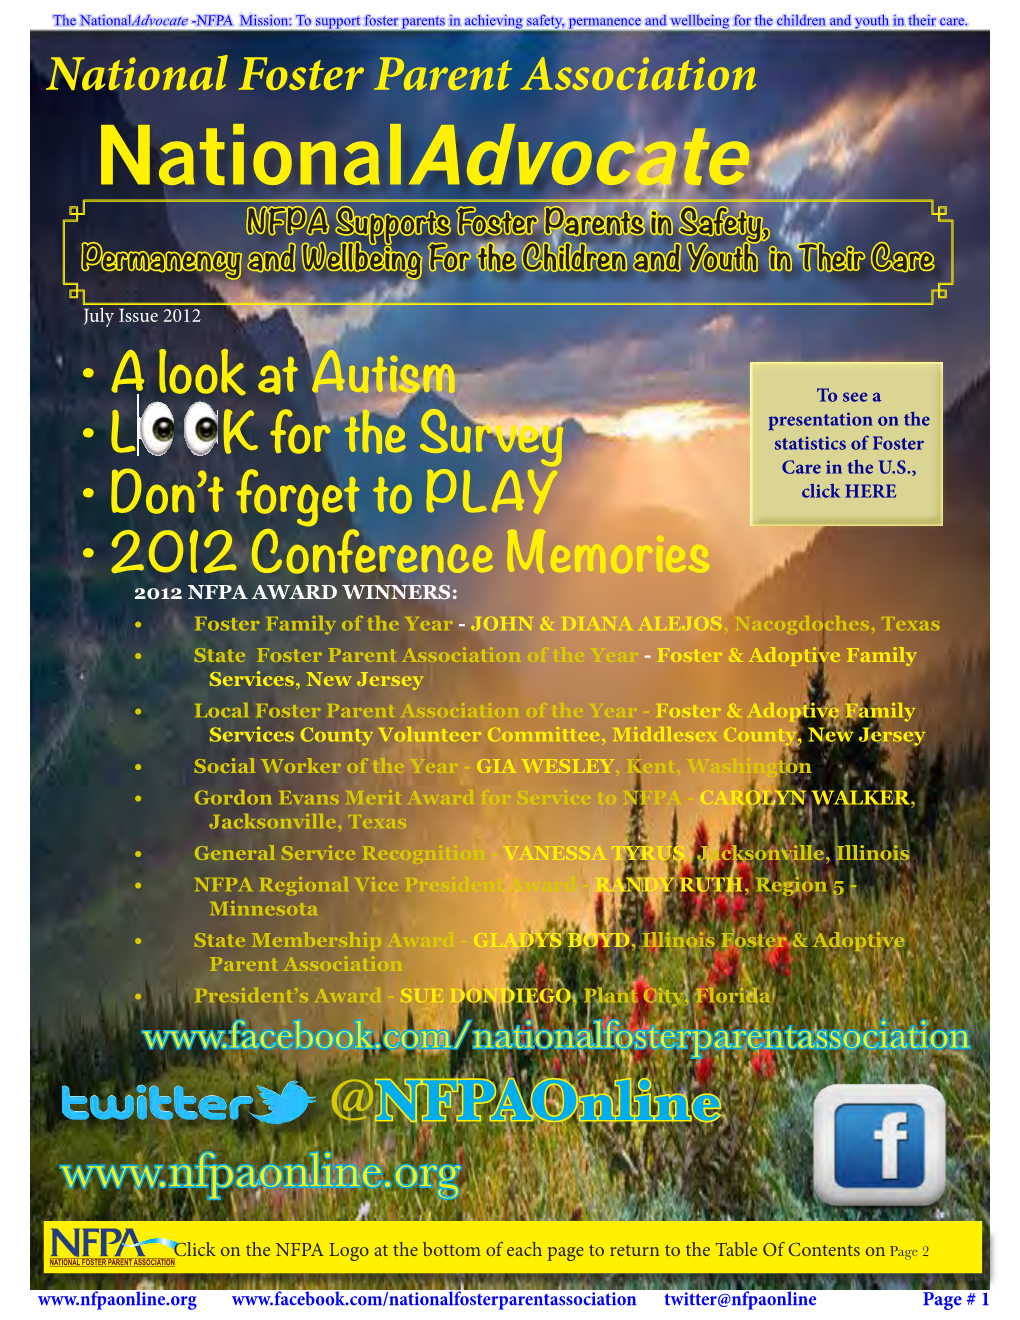 Nationaladvocate -NFPA Mission: to Support Foster Parents in Achieving Safety, Permanence and Wellbeing for the Children and Youth in Their Care